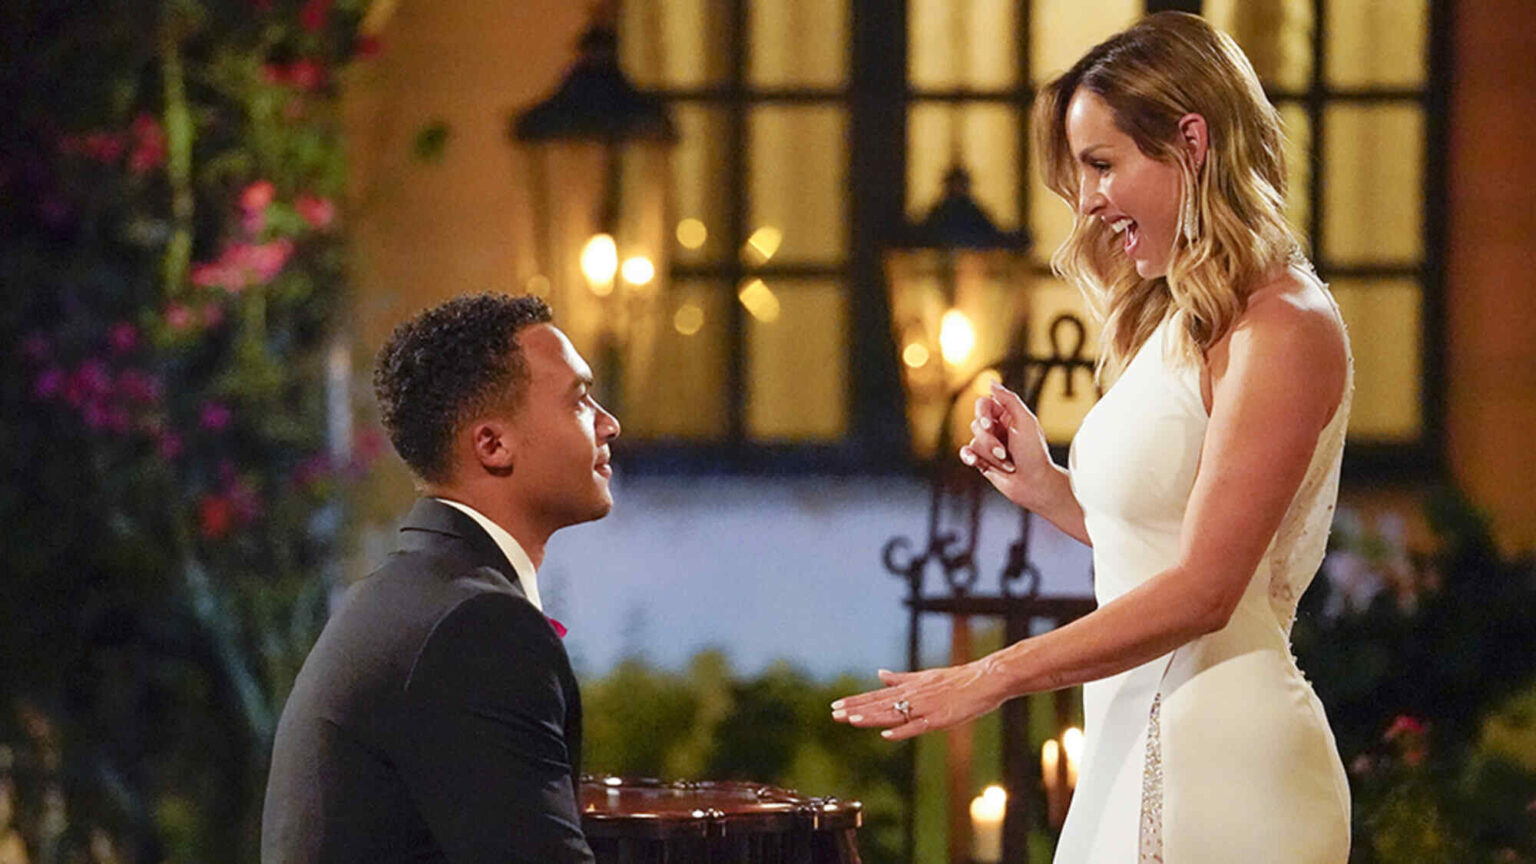 Could Clare Crawley be headed back to 'The Bachelorette' after her breakup with Dale Moss? Ready your roses with this story.